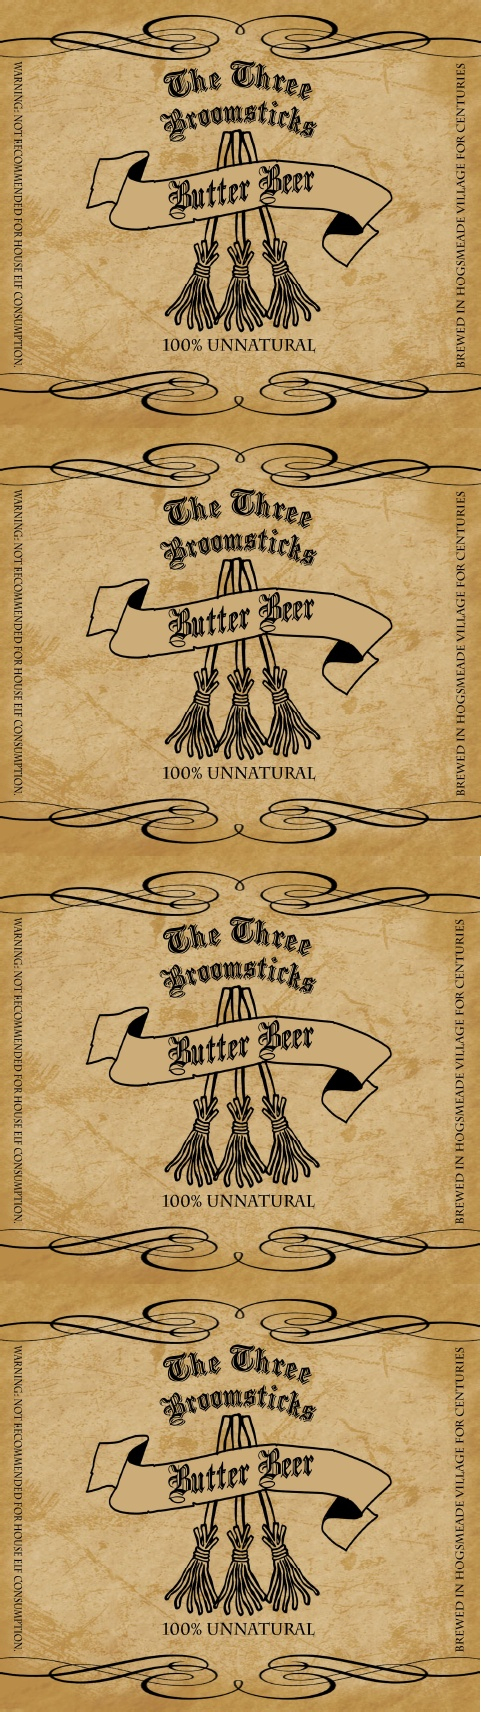 Hog Warts Express Butter Beer Label | Harry Potter Party Ideas - Free Printable Butterbeer Labels